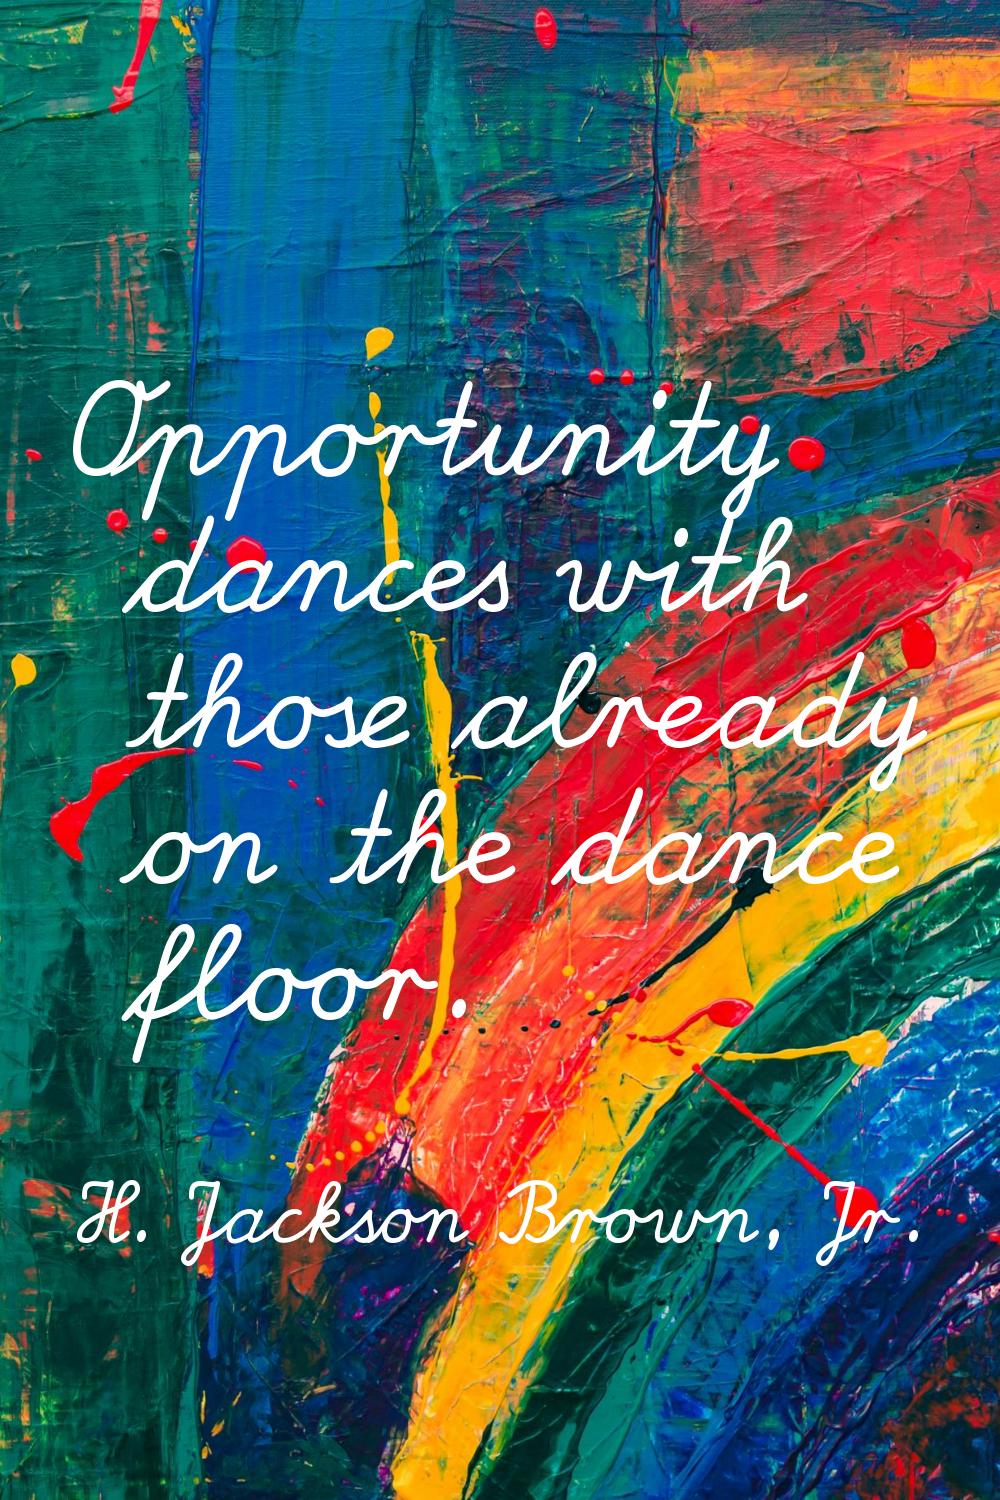 Opportunity dances with those already on the dance floor.